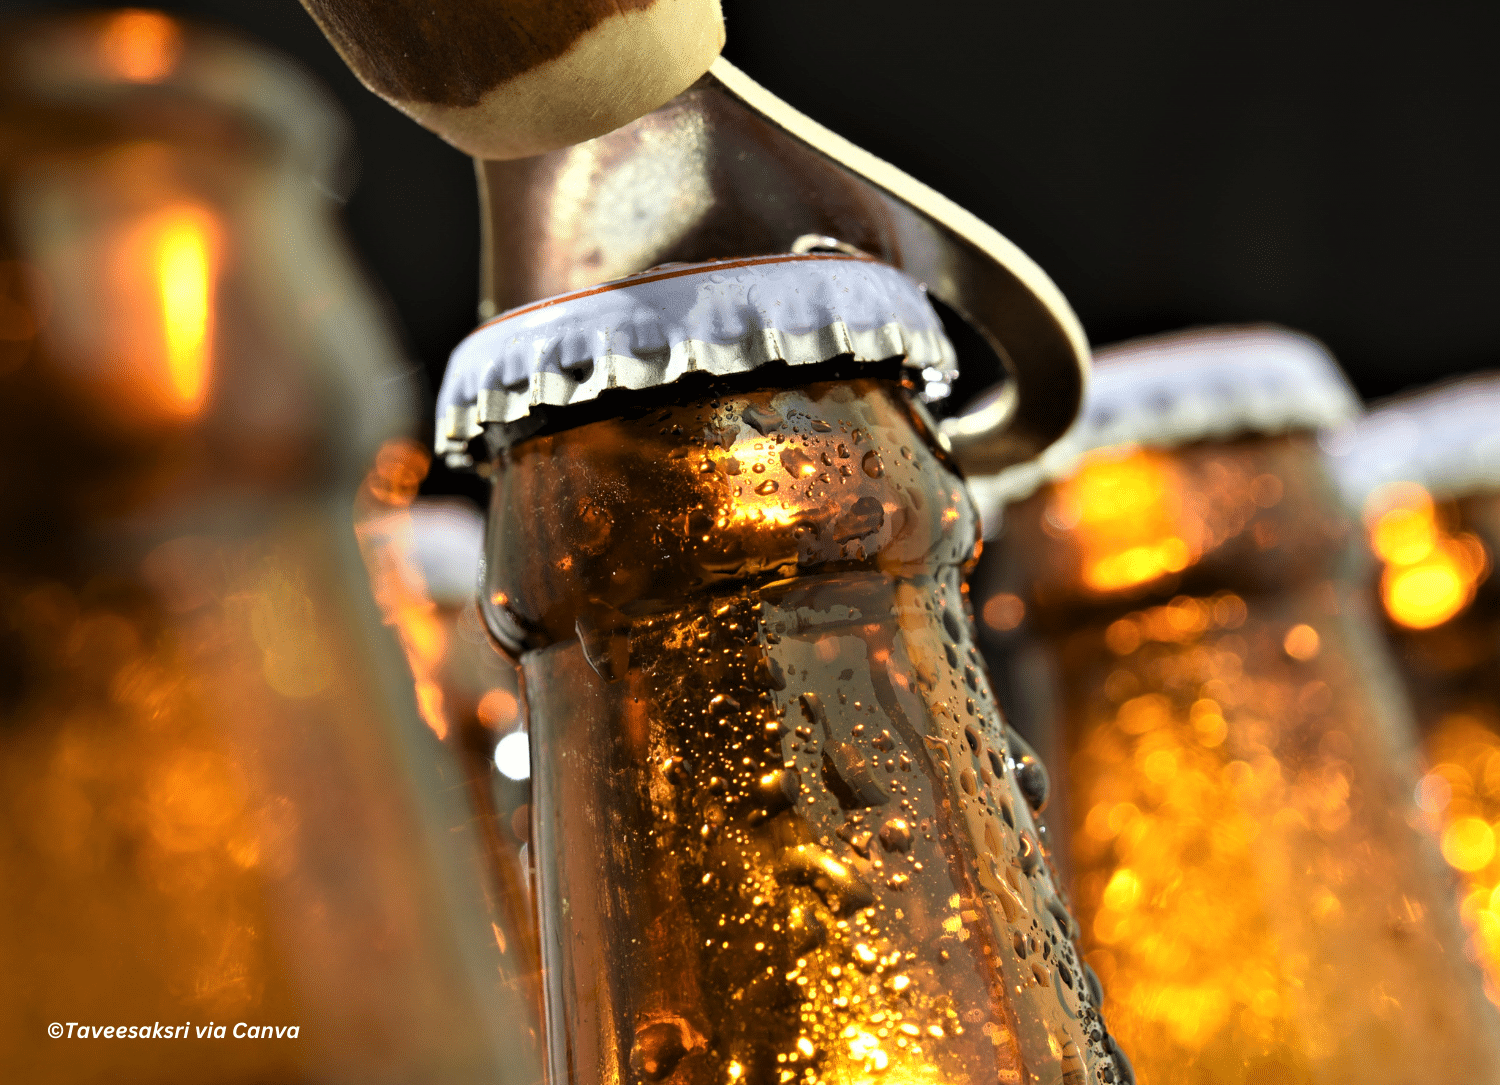 horizontal photo of the cap of a beer bottle being removed with other beer bottles around it